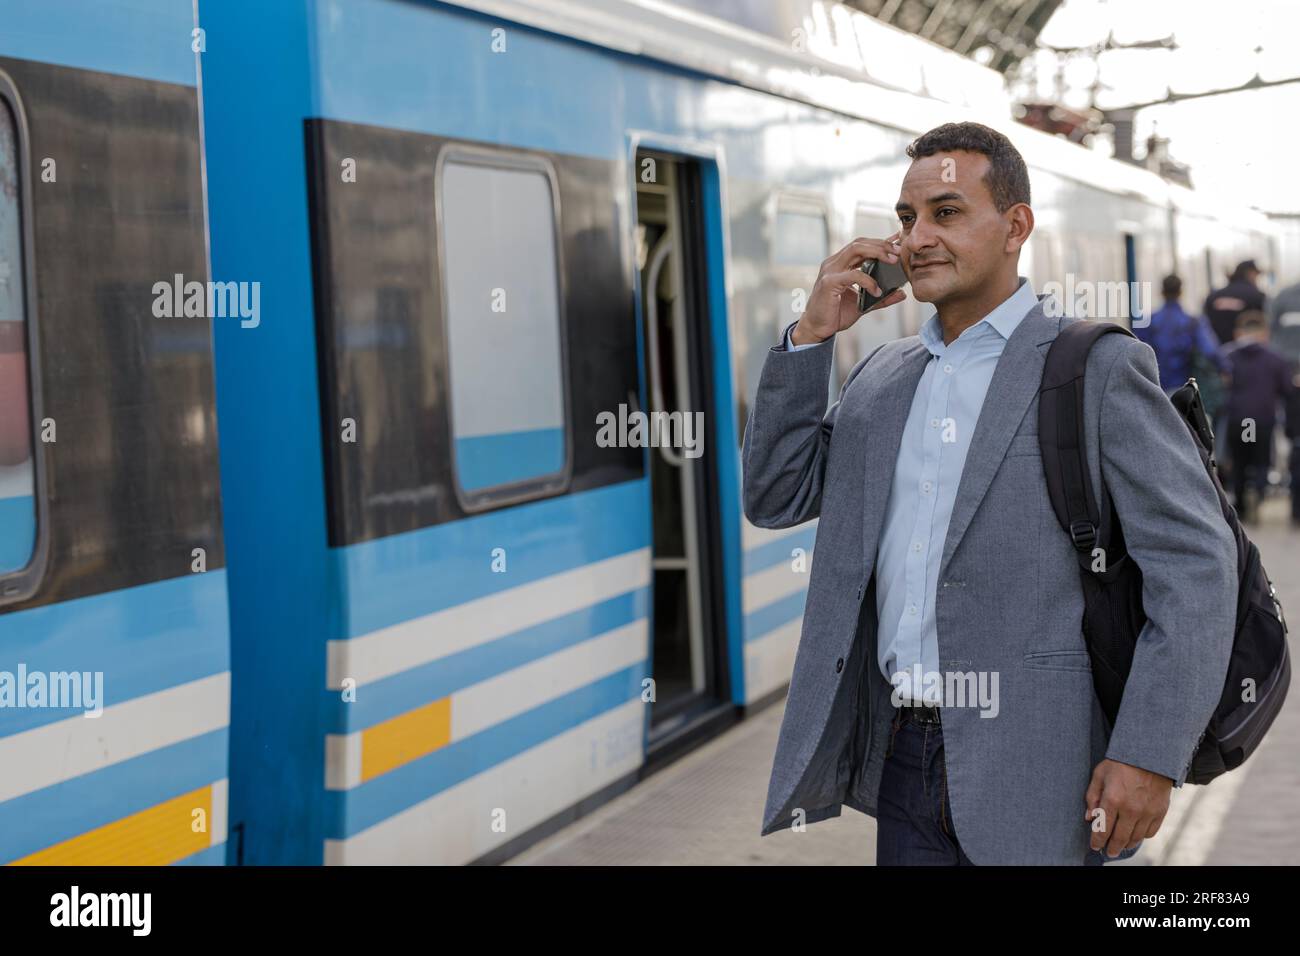 Latin man in a suit waiting for the train and talking on the mobile phone. Stock Photo